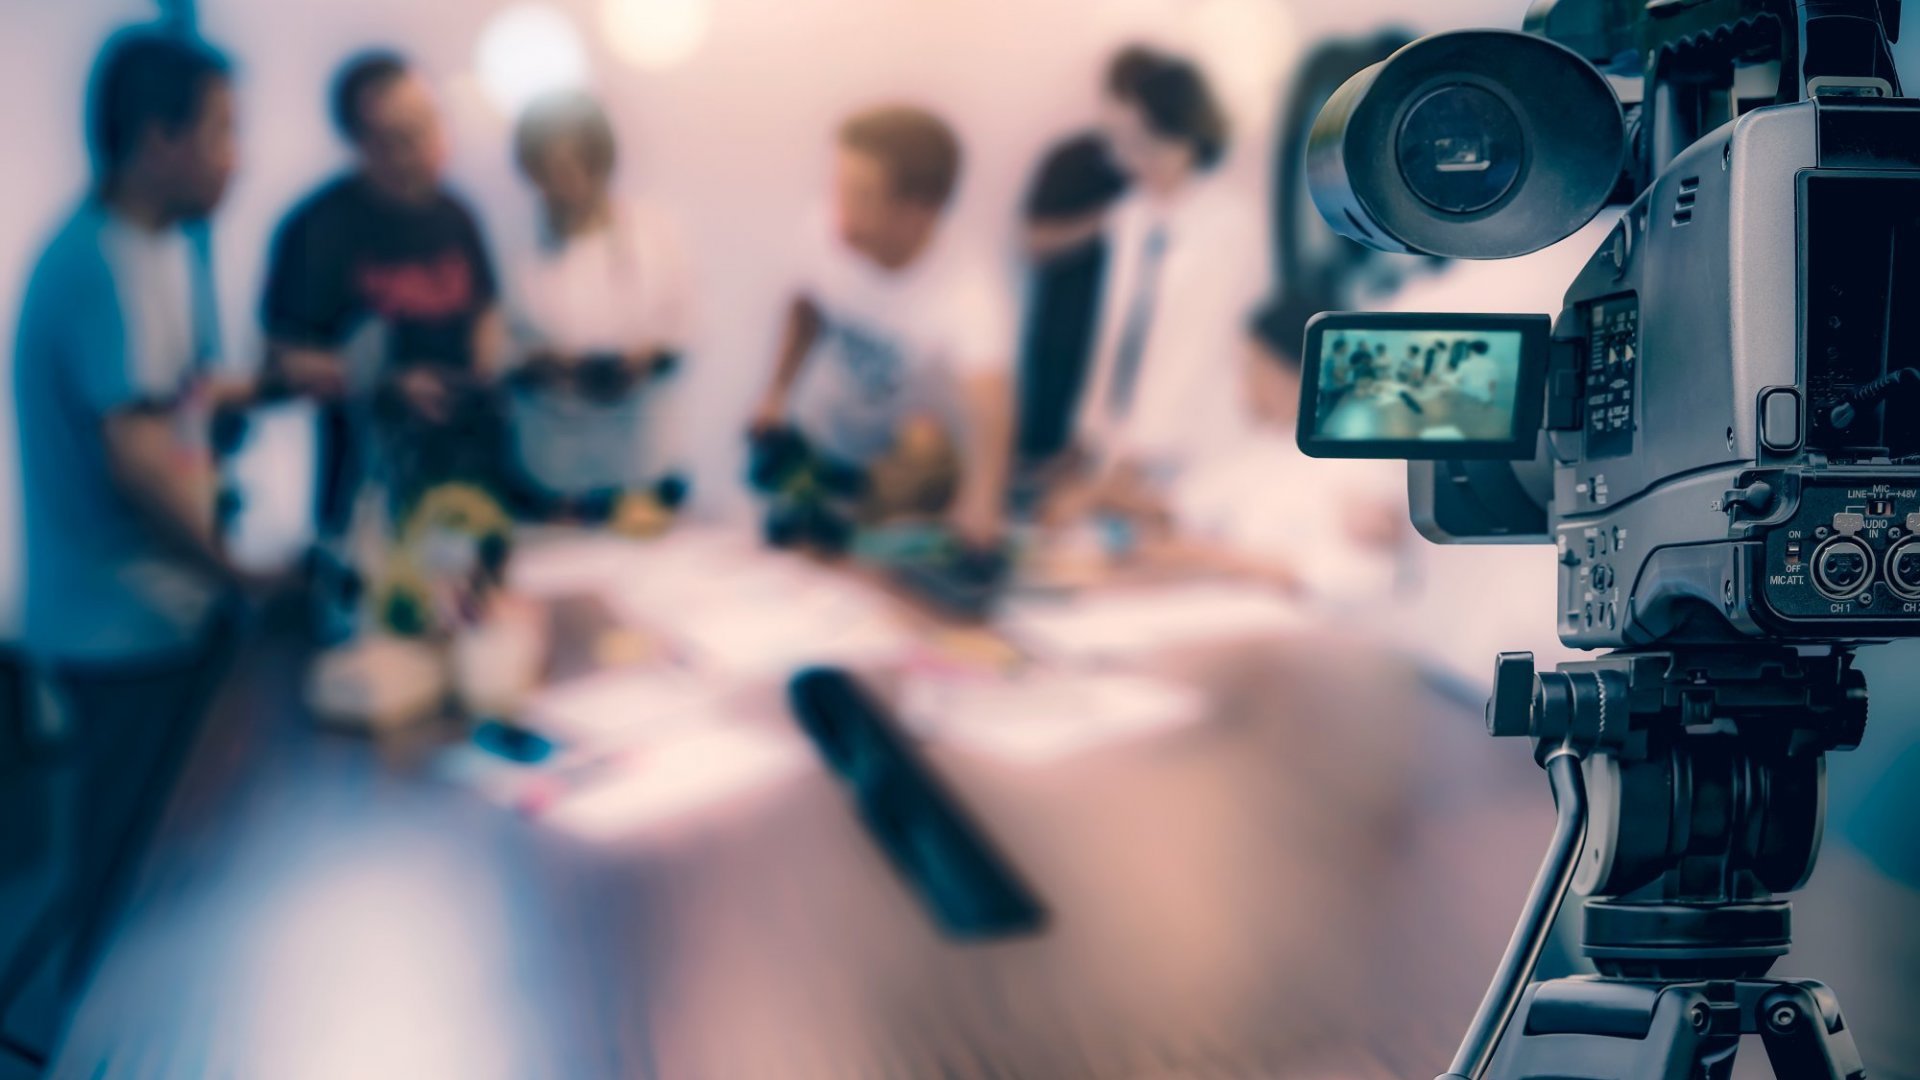 Videos are a creative way of promoting your brand and engaging with audiences. Because of the numerous ways they can be used, having a video marketing strategy should be a priority for every business.